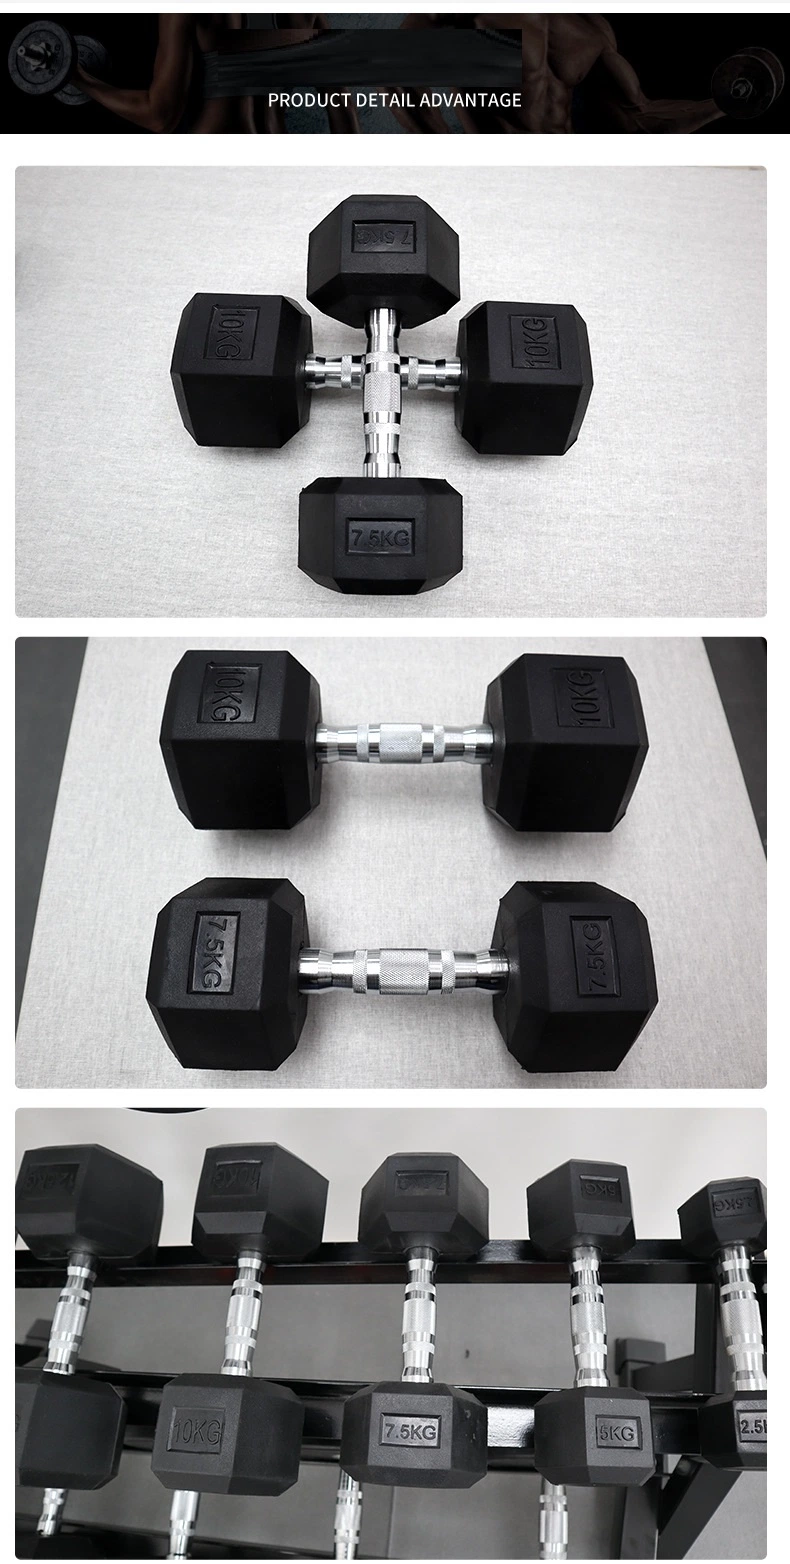 Environmental Rubber All Tz Fitness Carton Free Weights Dumbbell Set